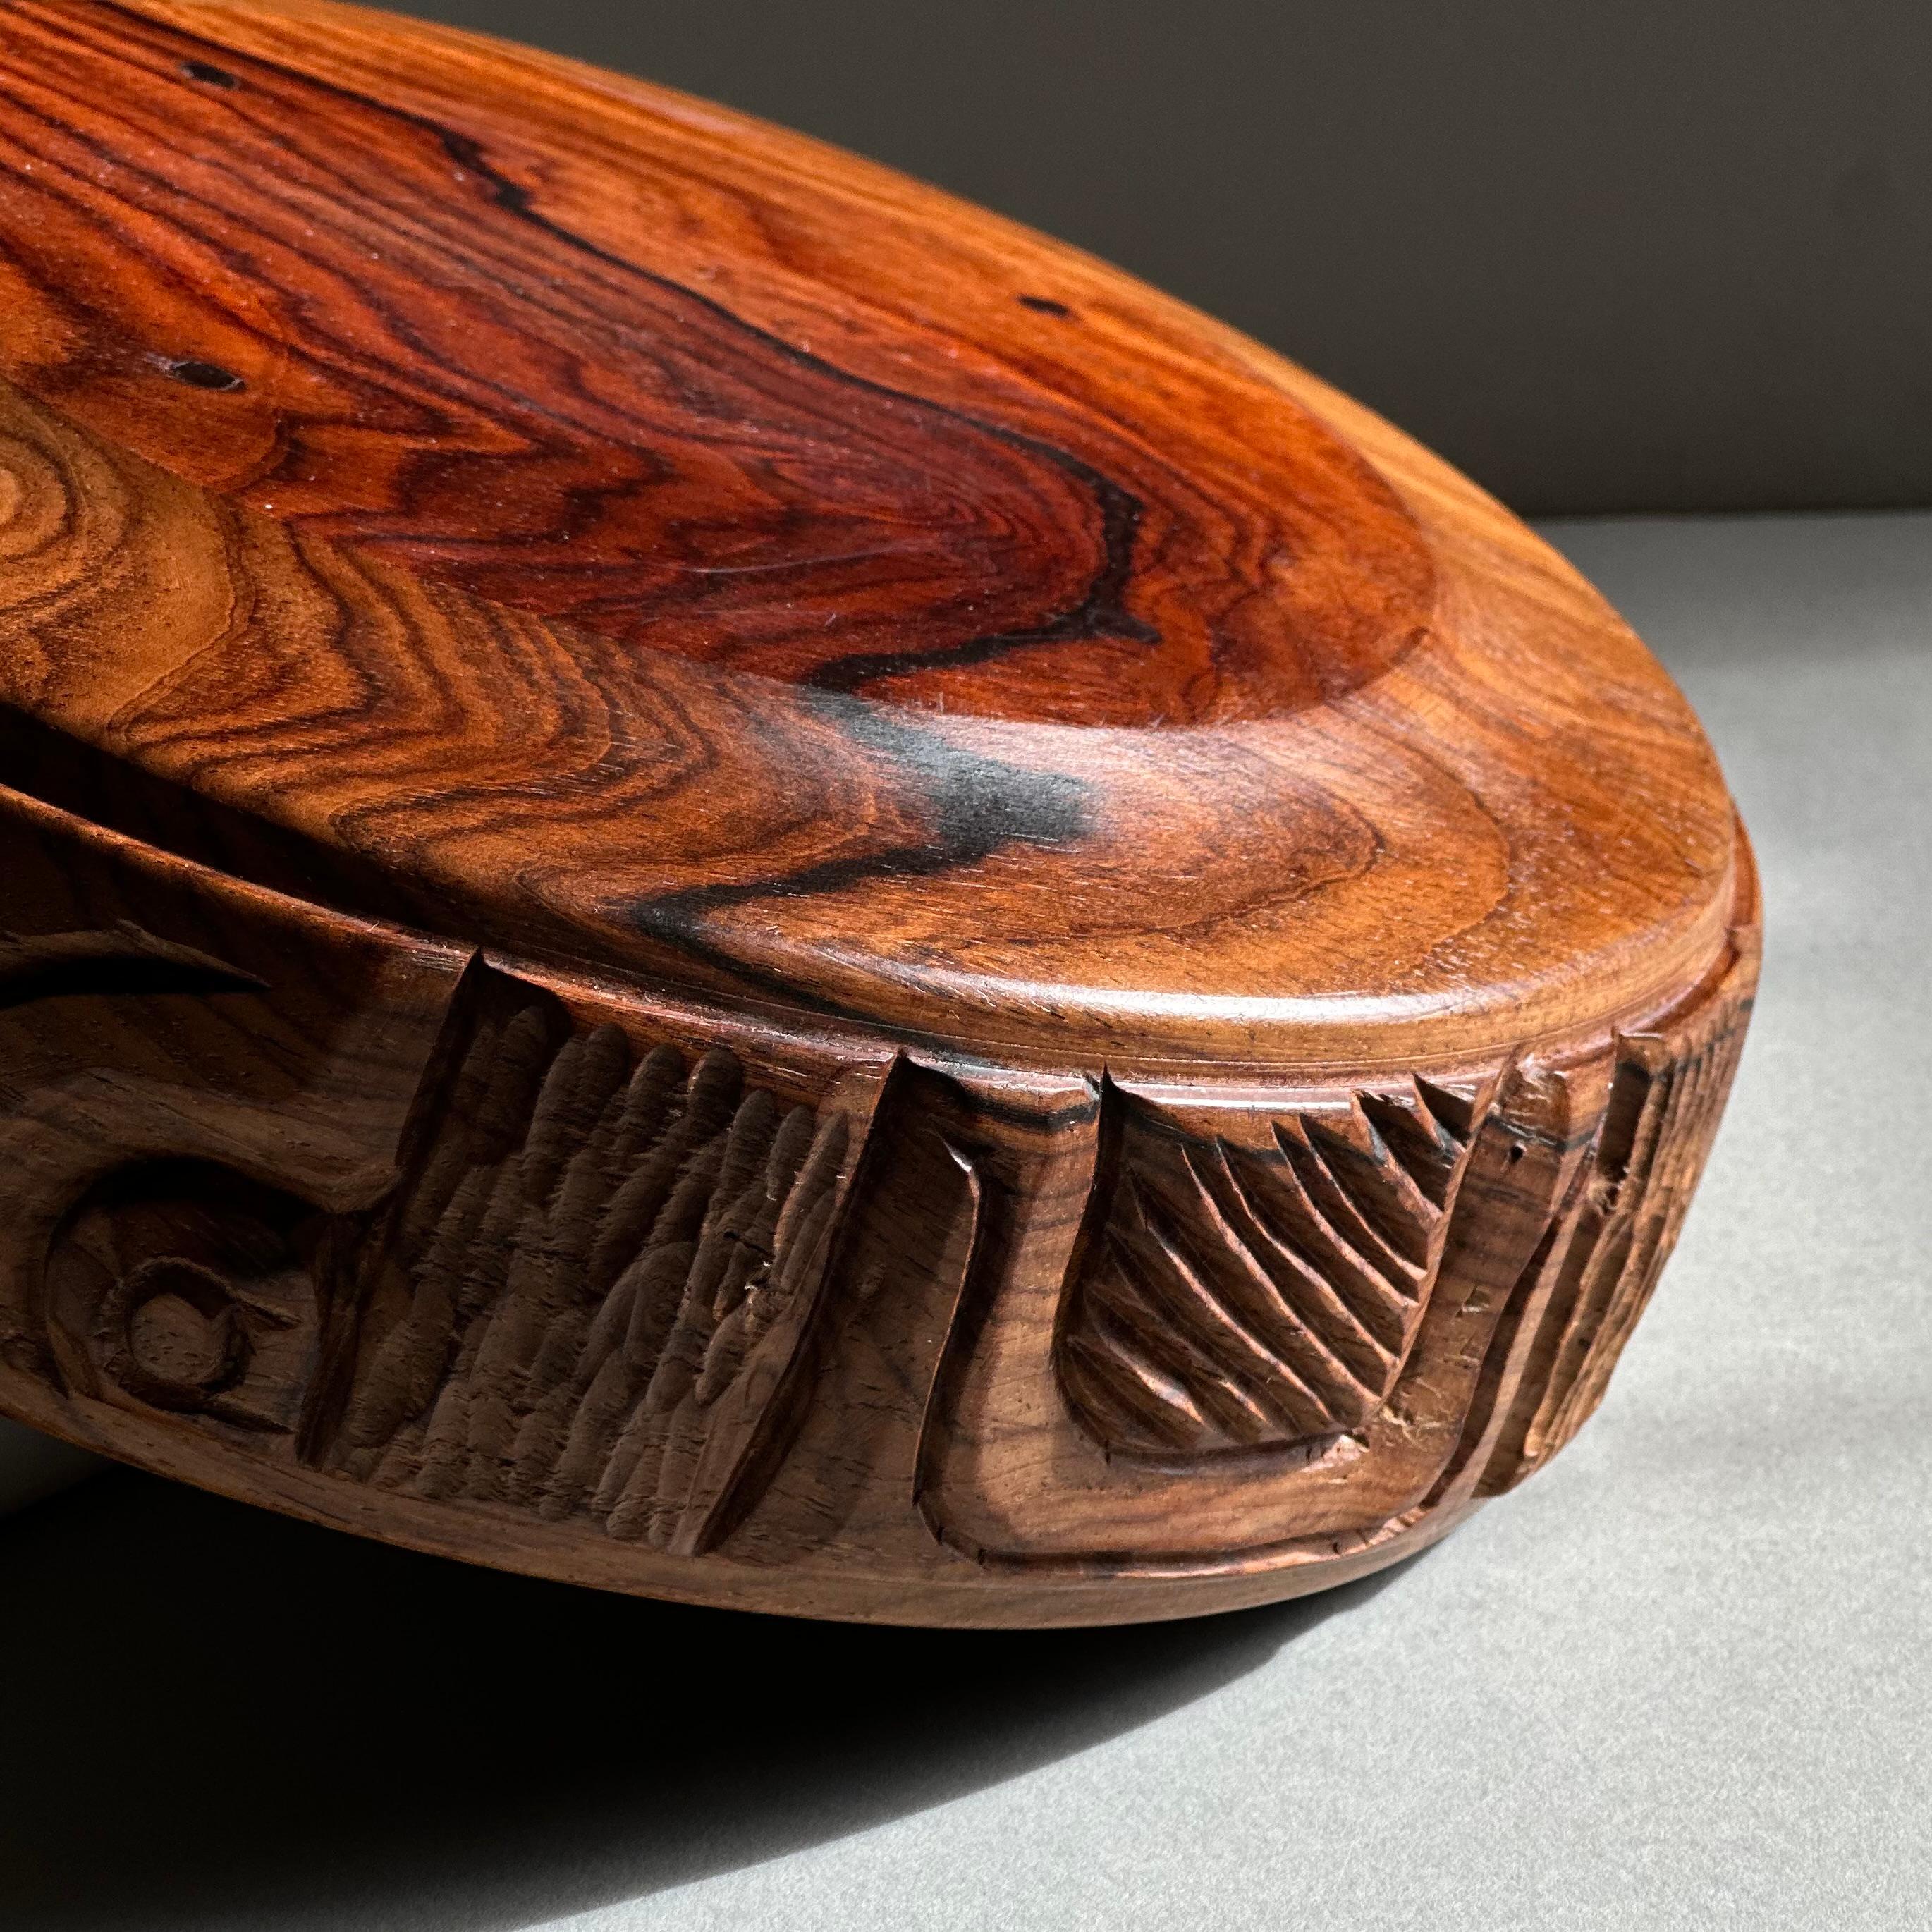 Turned and Hand Carved Exotic Wood Bowl After Leroy Setziol For Sale 7